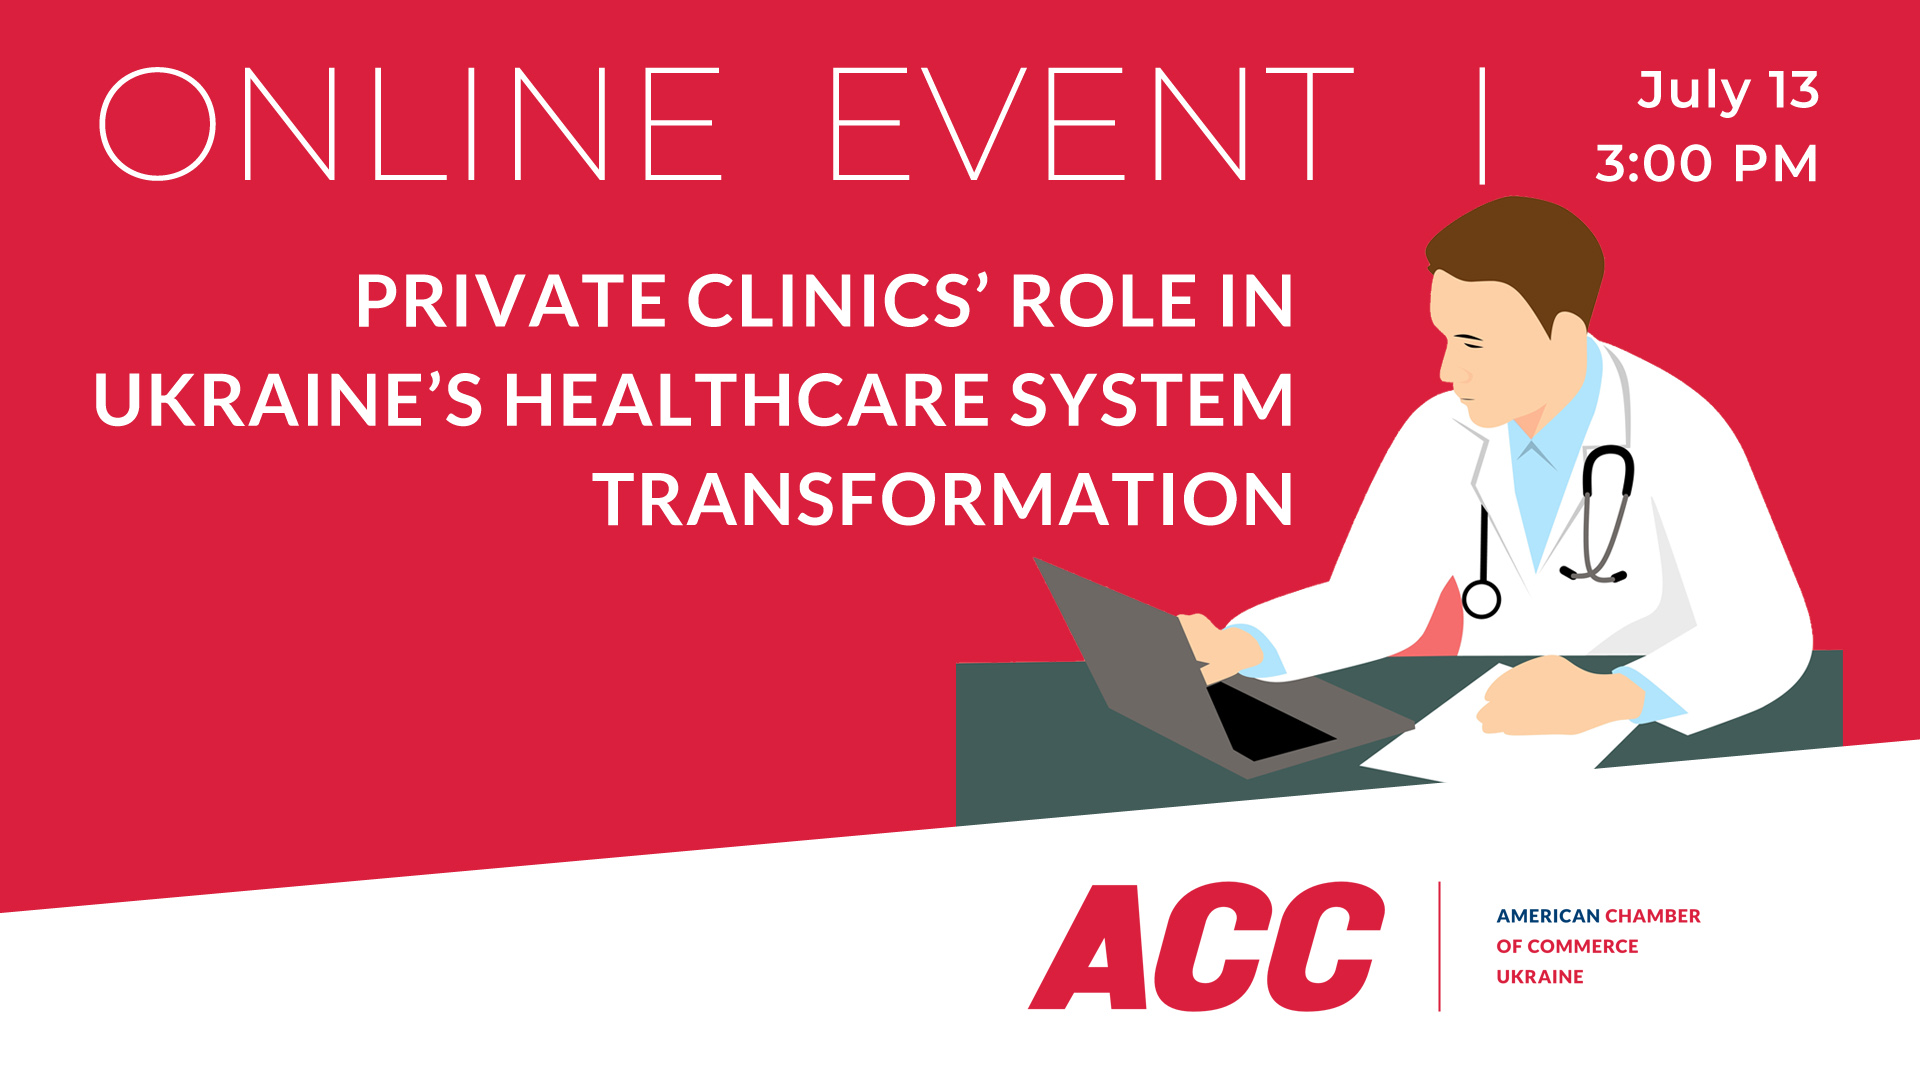 Online Panel Discussion “Private Clinics’ Role in Ukraine’s Healthcare System Transformation”